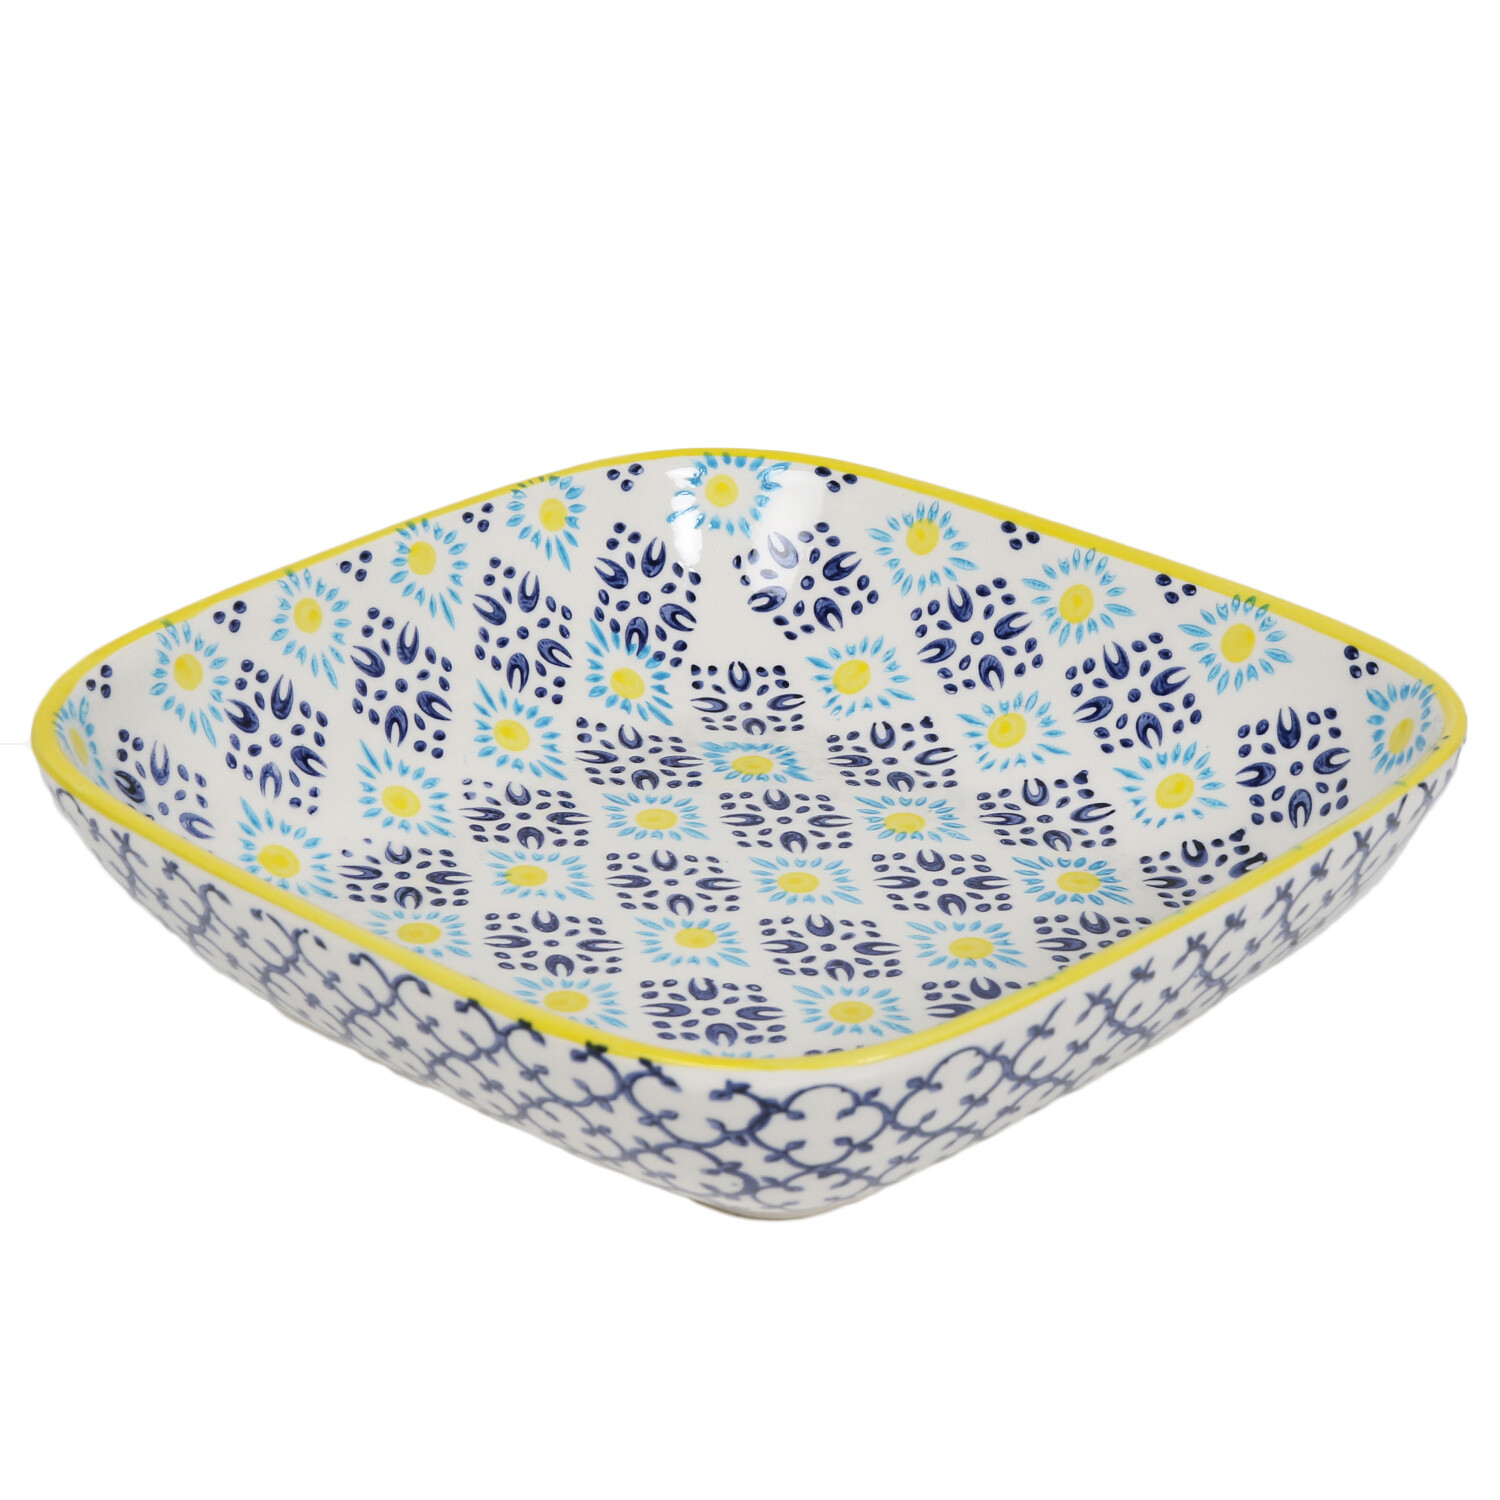 Single Amari Square Serving Bowl in Assorted styles Image 2